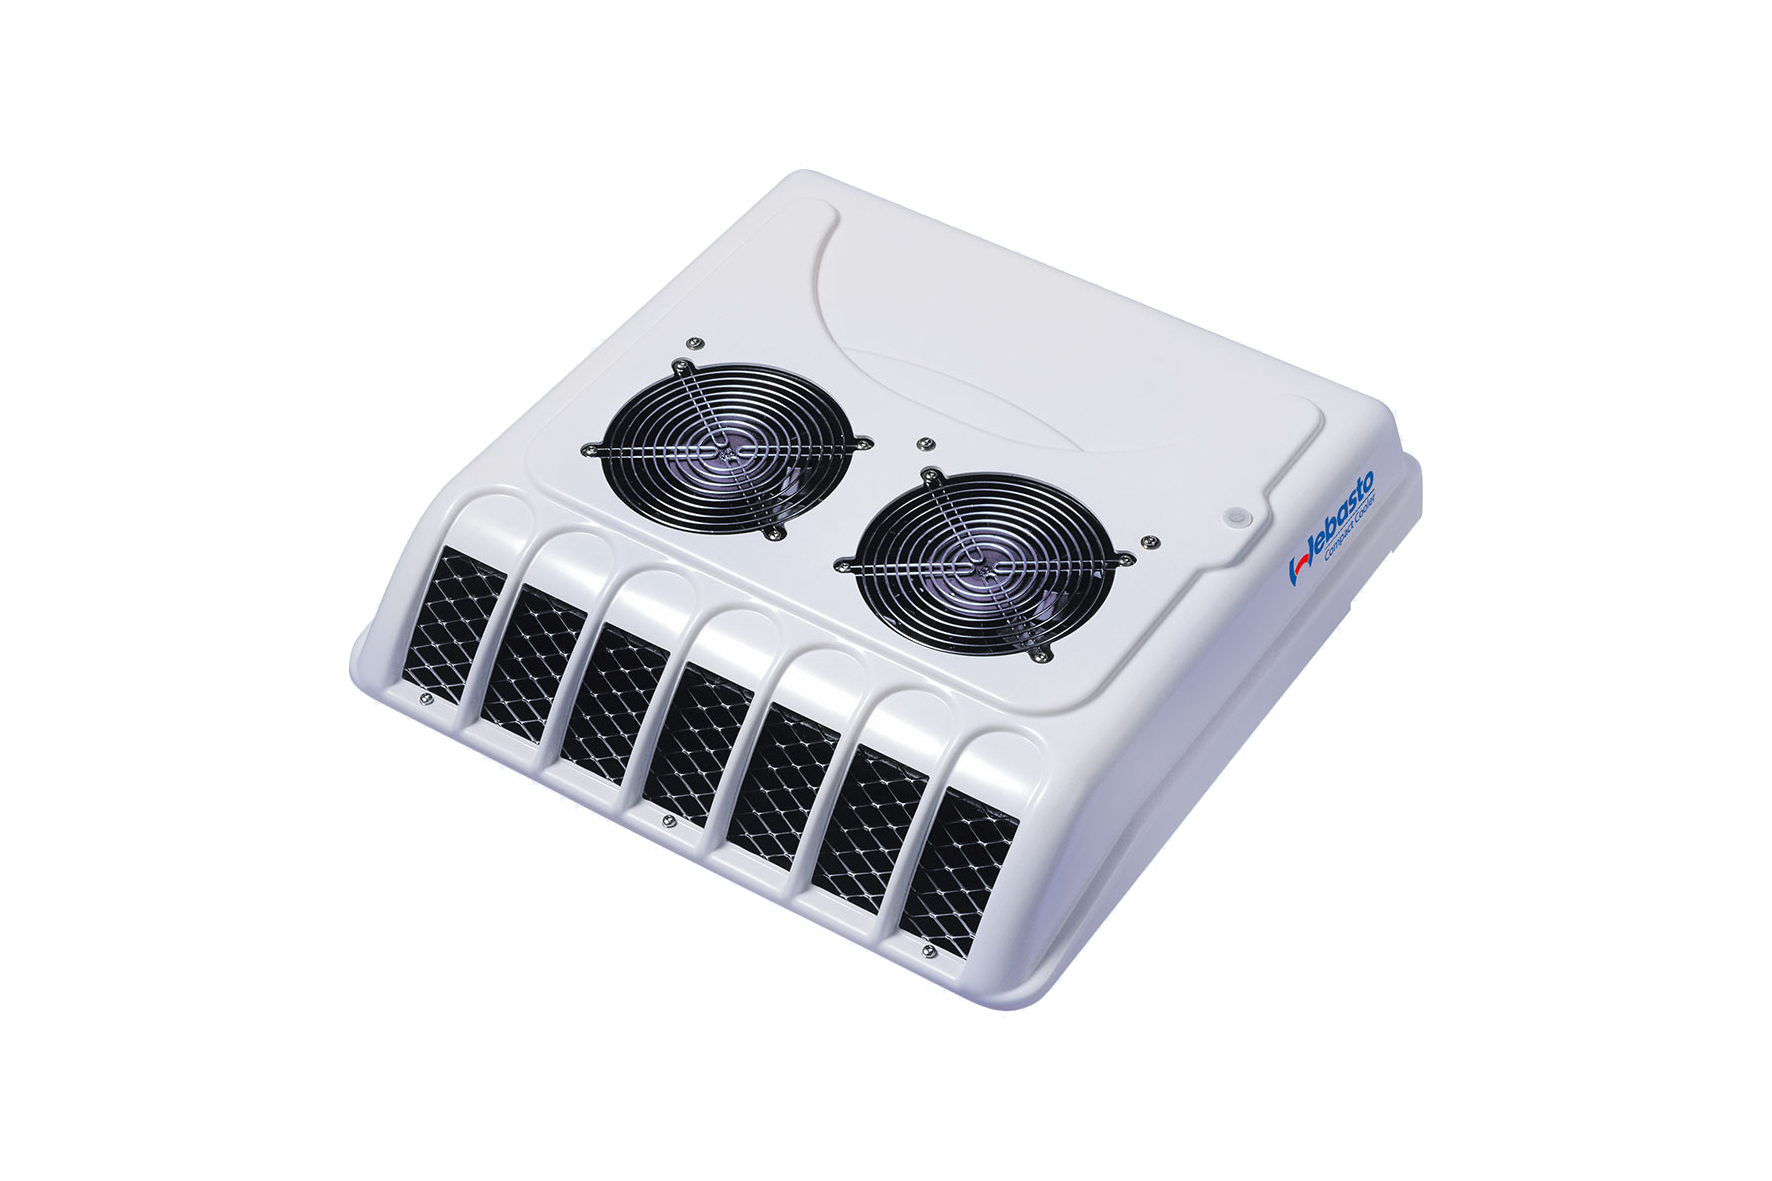 Product picture of Webasto rooftop air-conditioning system model Compact Cooler 5